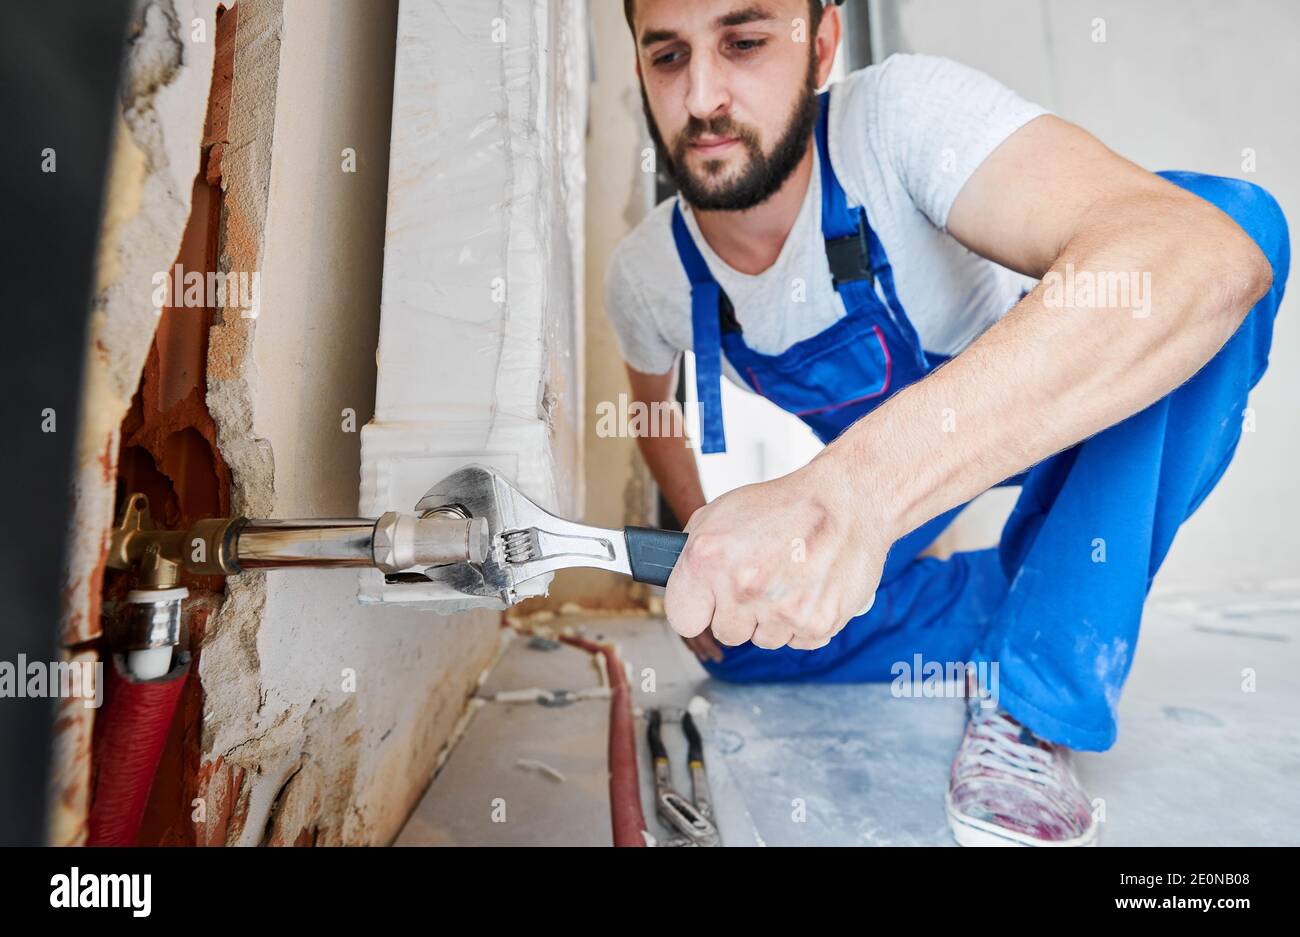 Horizontal snapshot of handsome plumber screwing plumbing fittings with wrench. Close-up of strong arm working with a tool during installation works in new apartment. Focus on hand with instrument. Stock Photo